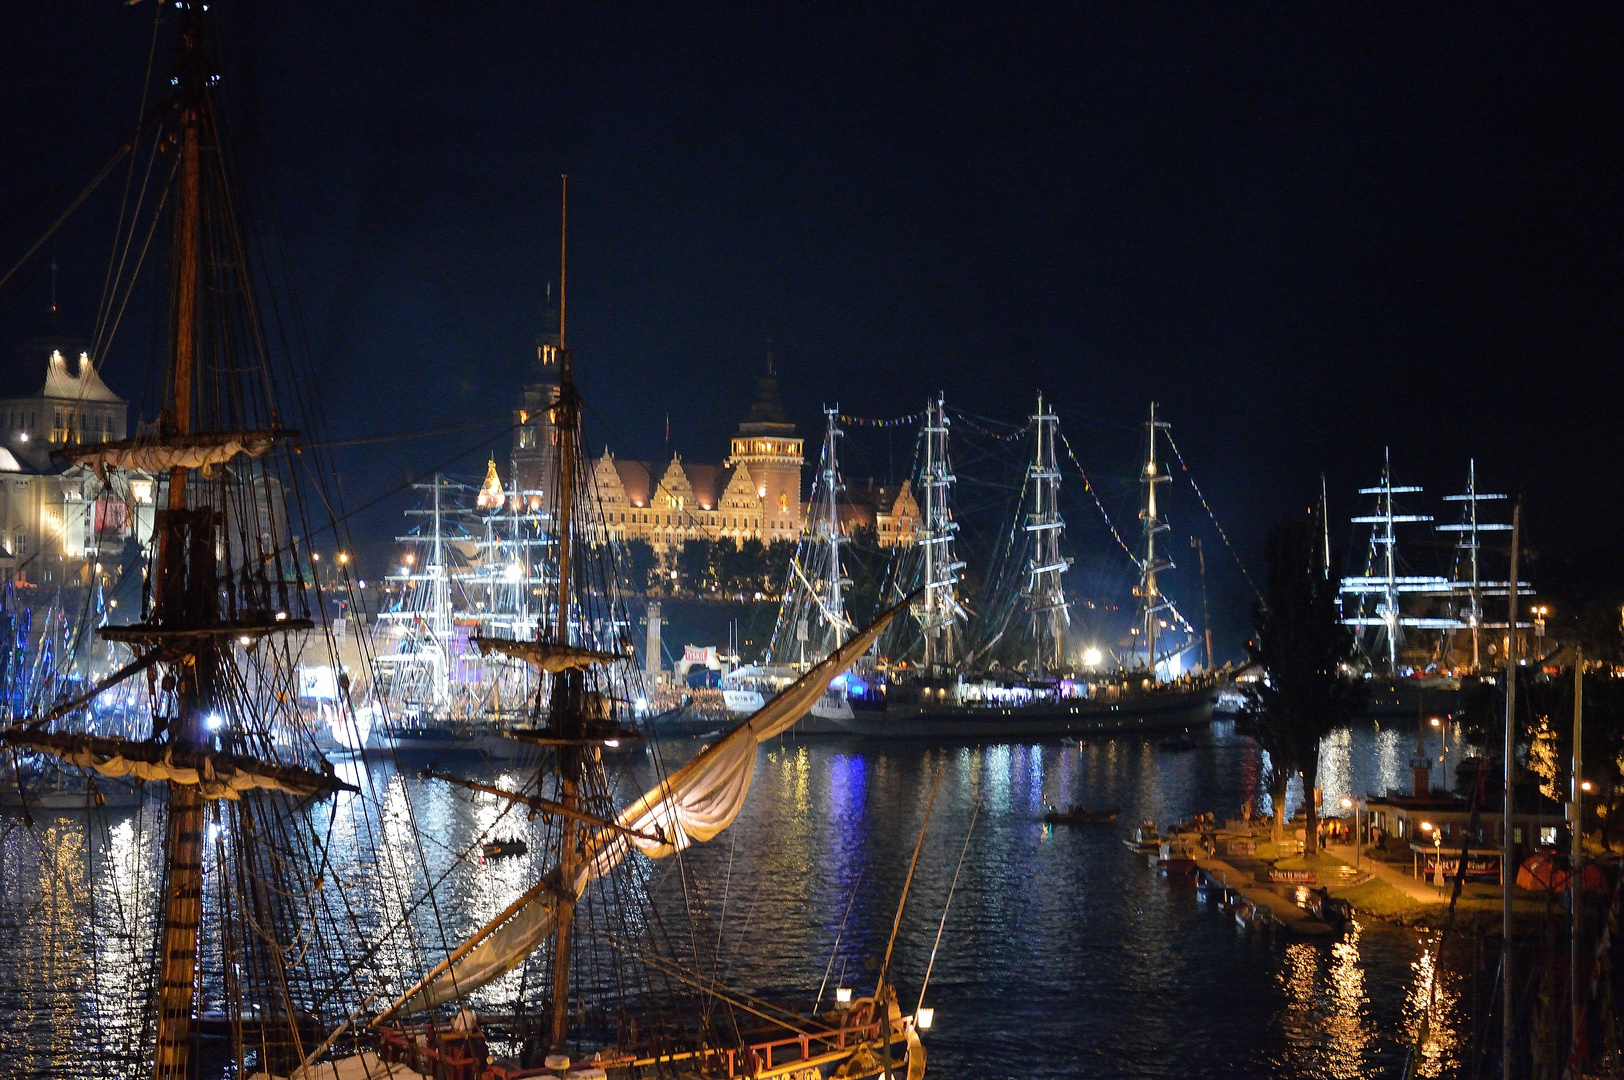 Tall ships races